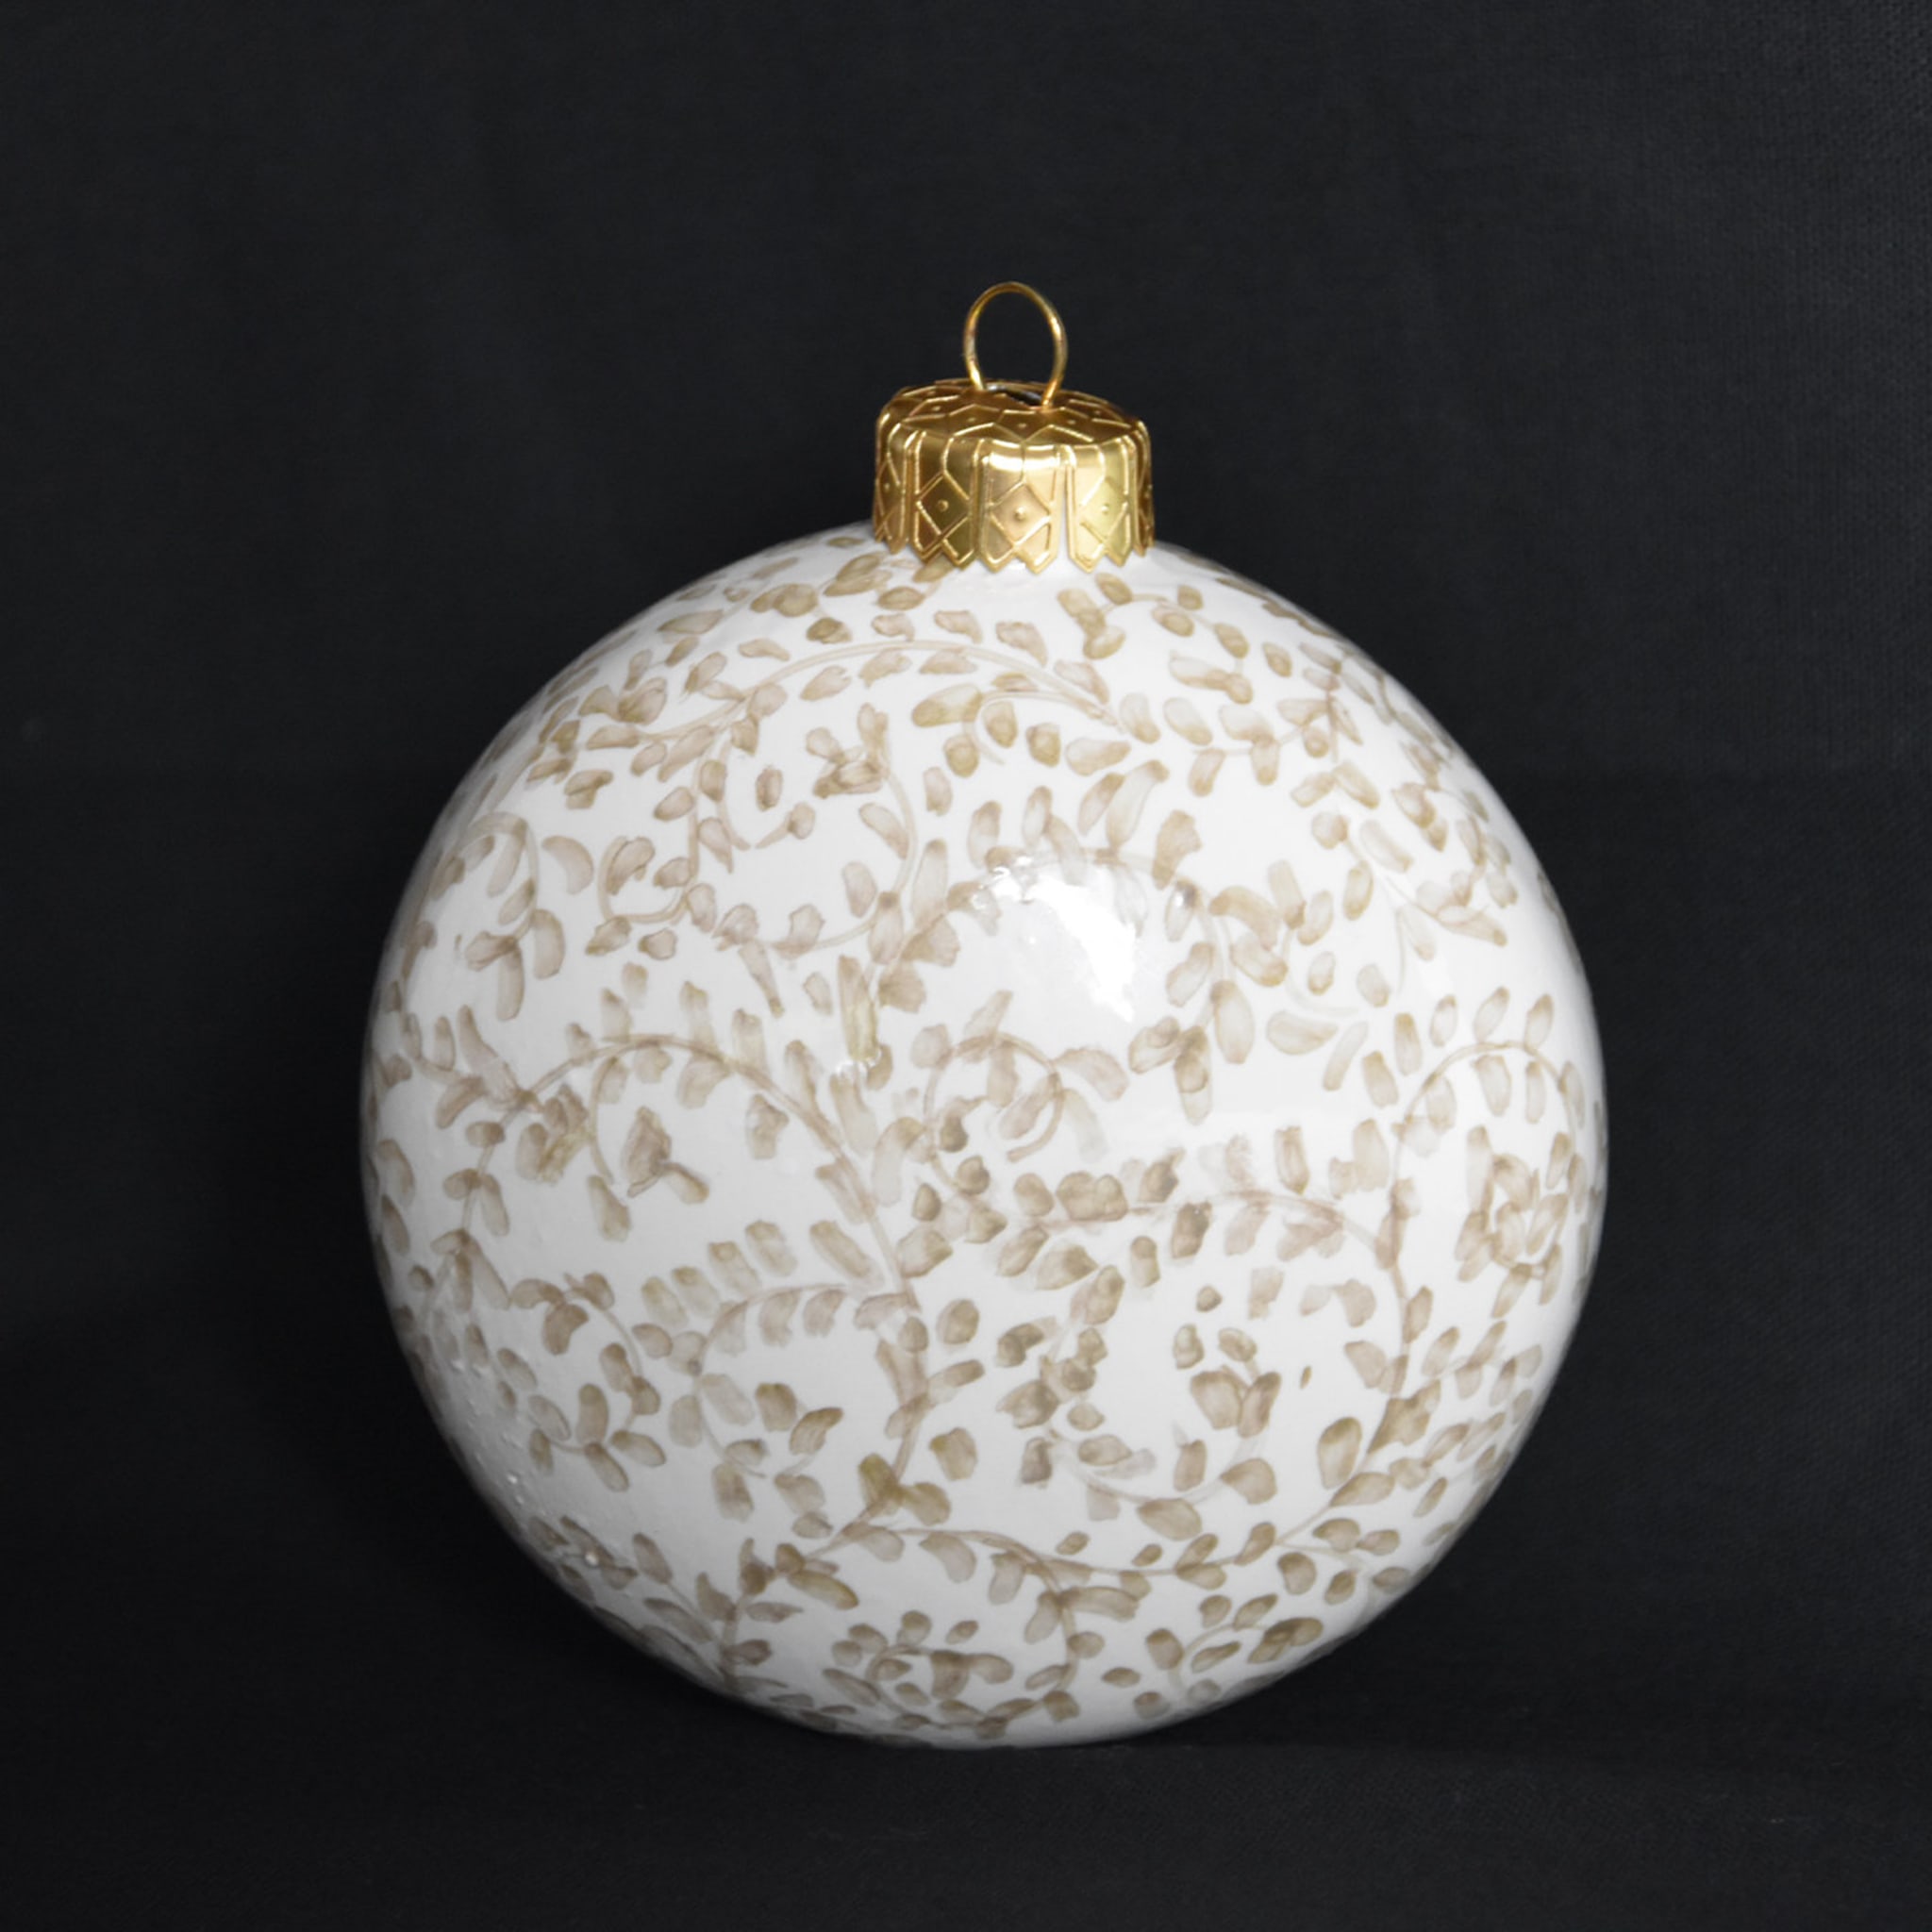 Ivory Floral Christmas Ball Ornament - Alternative view 1